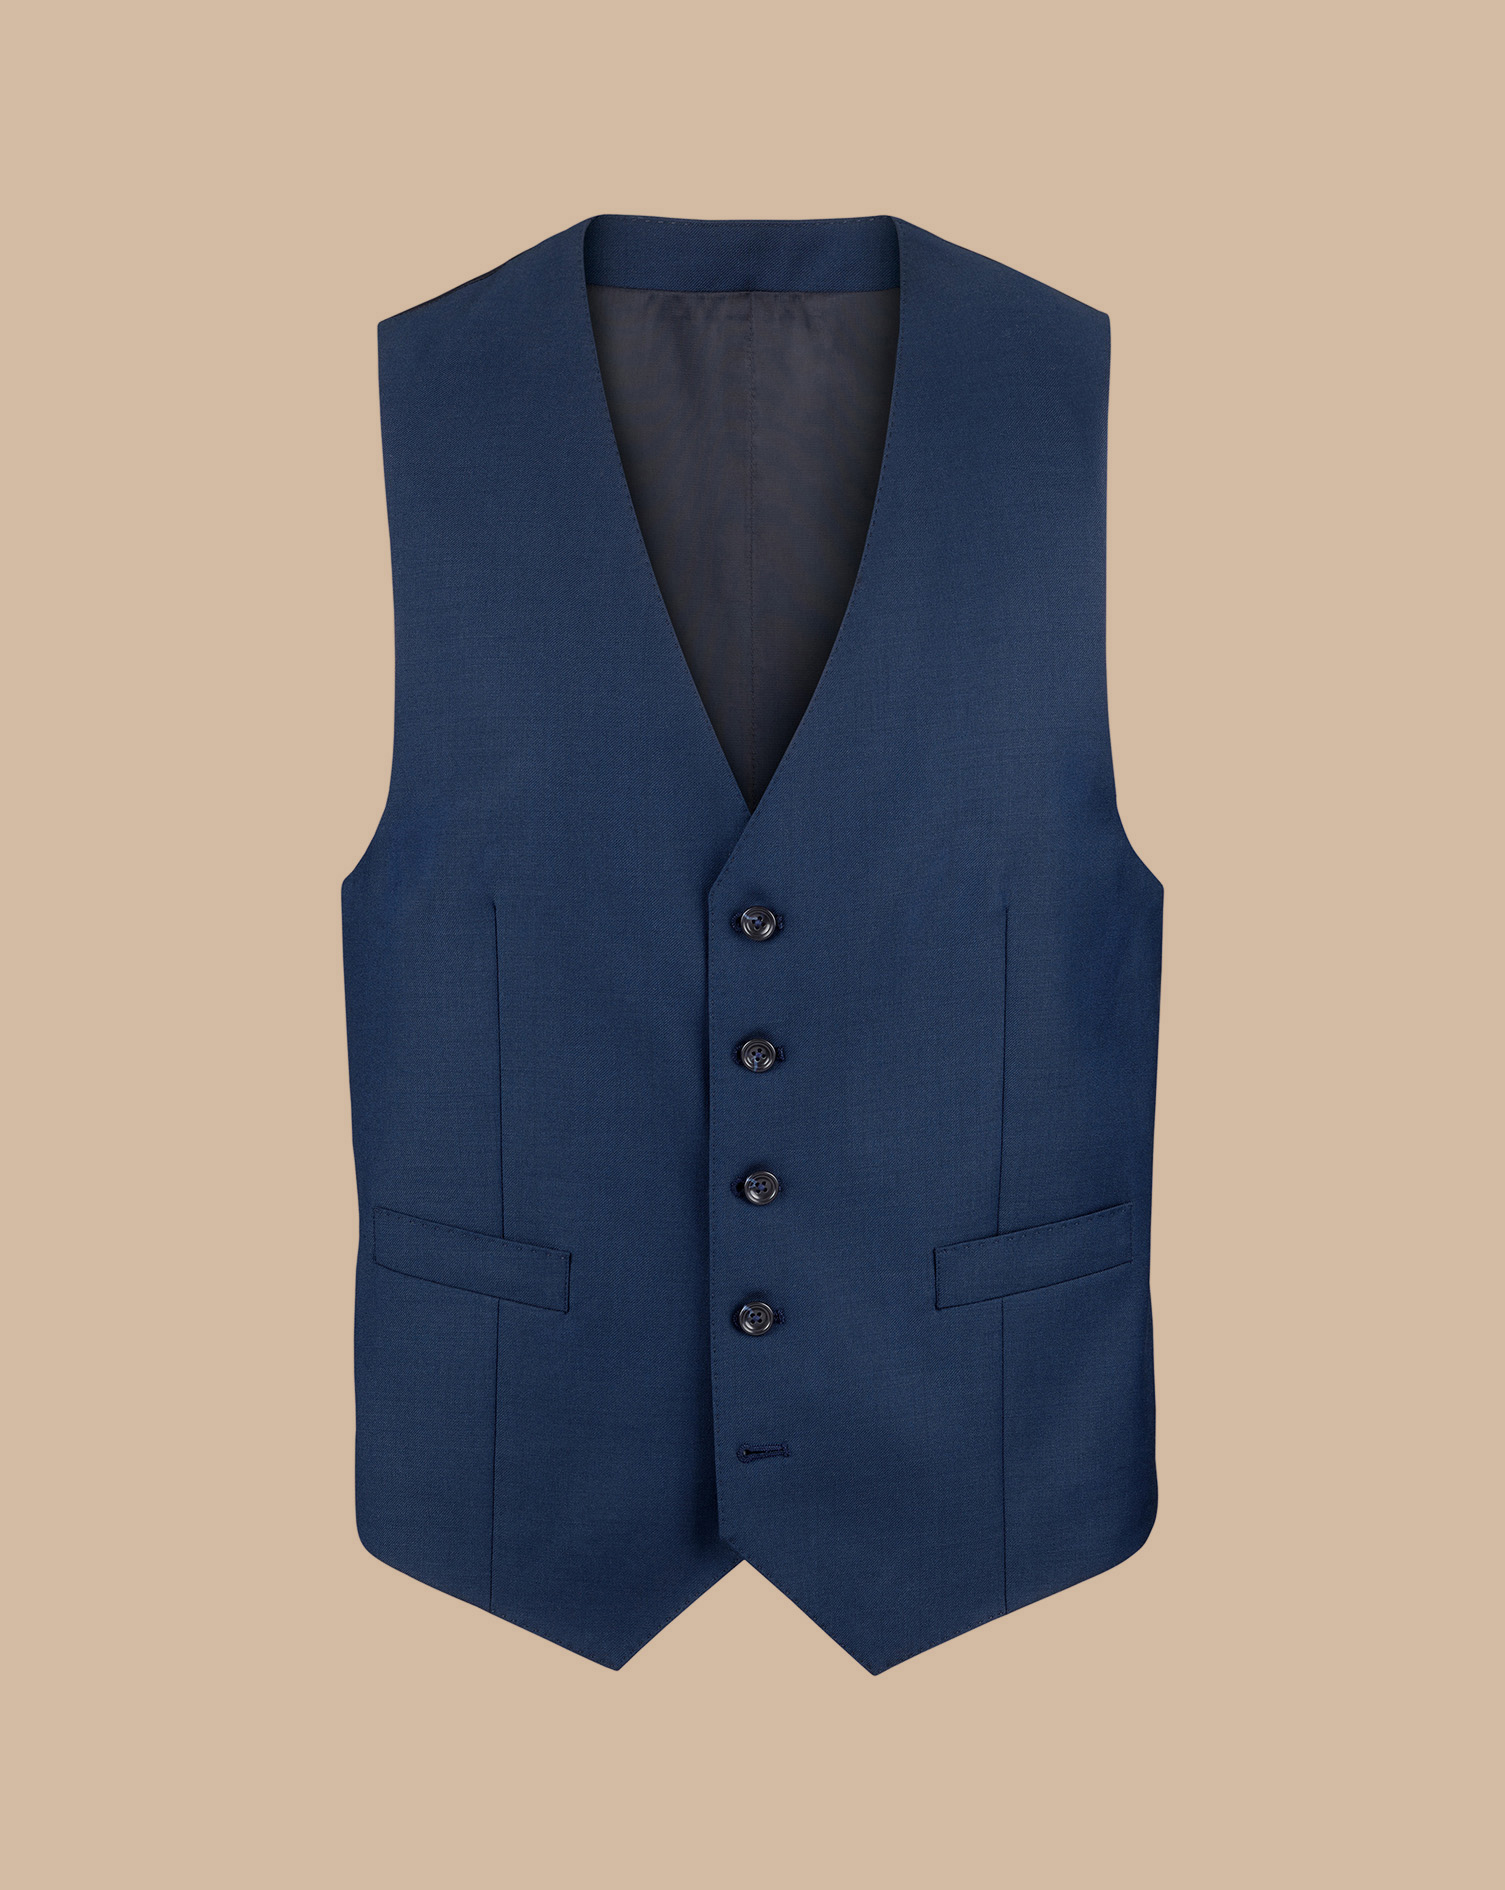 Men's Charles Tyrwhitt Natural Stretch Twill Suit Waistcoat - Royal Blue Size w46 Wool
